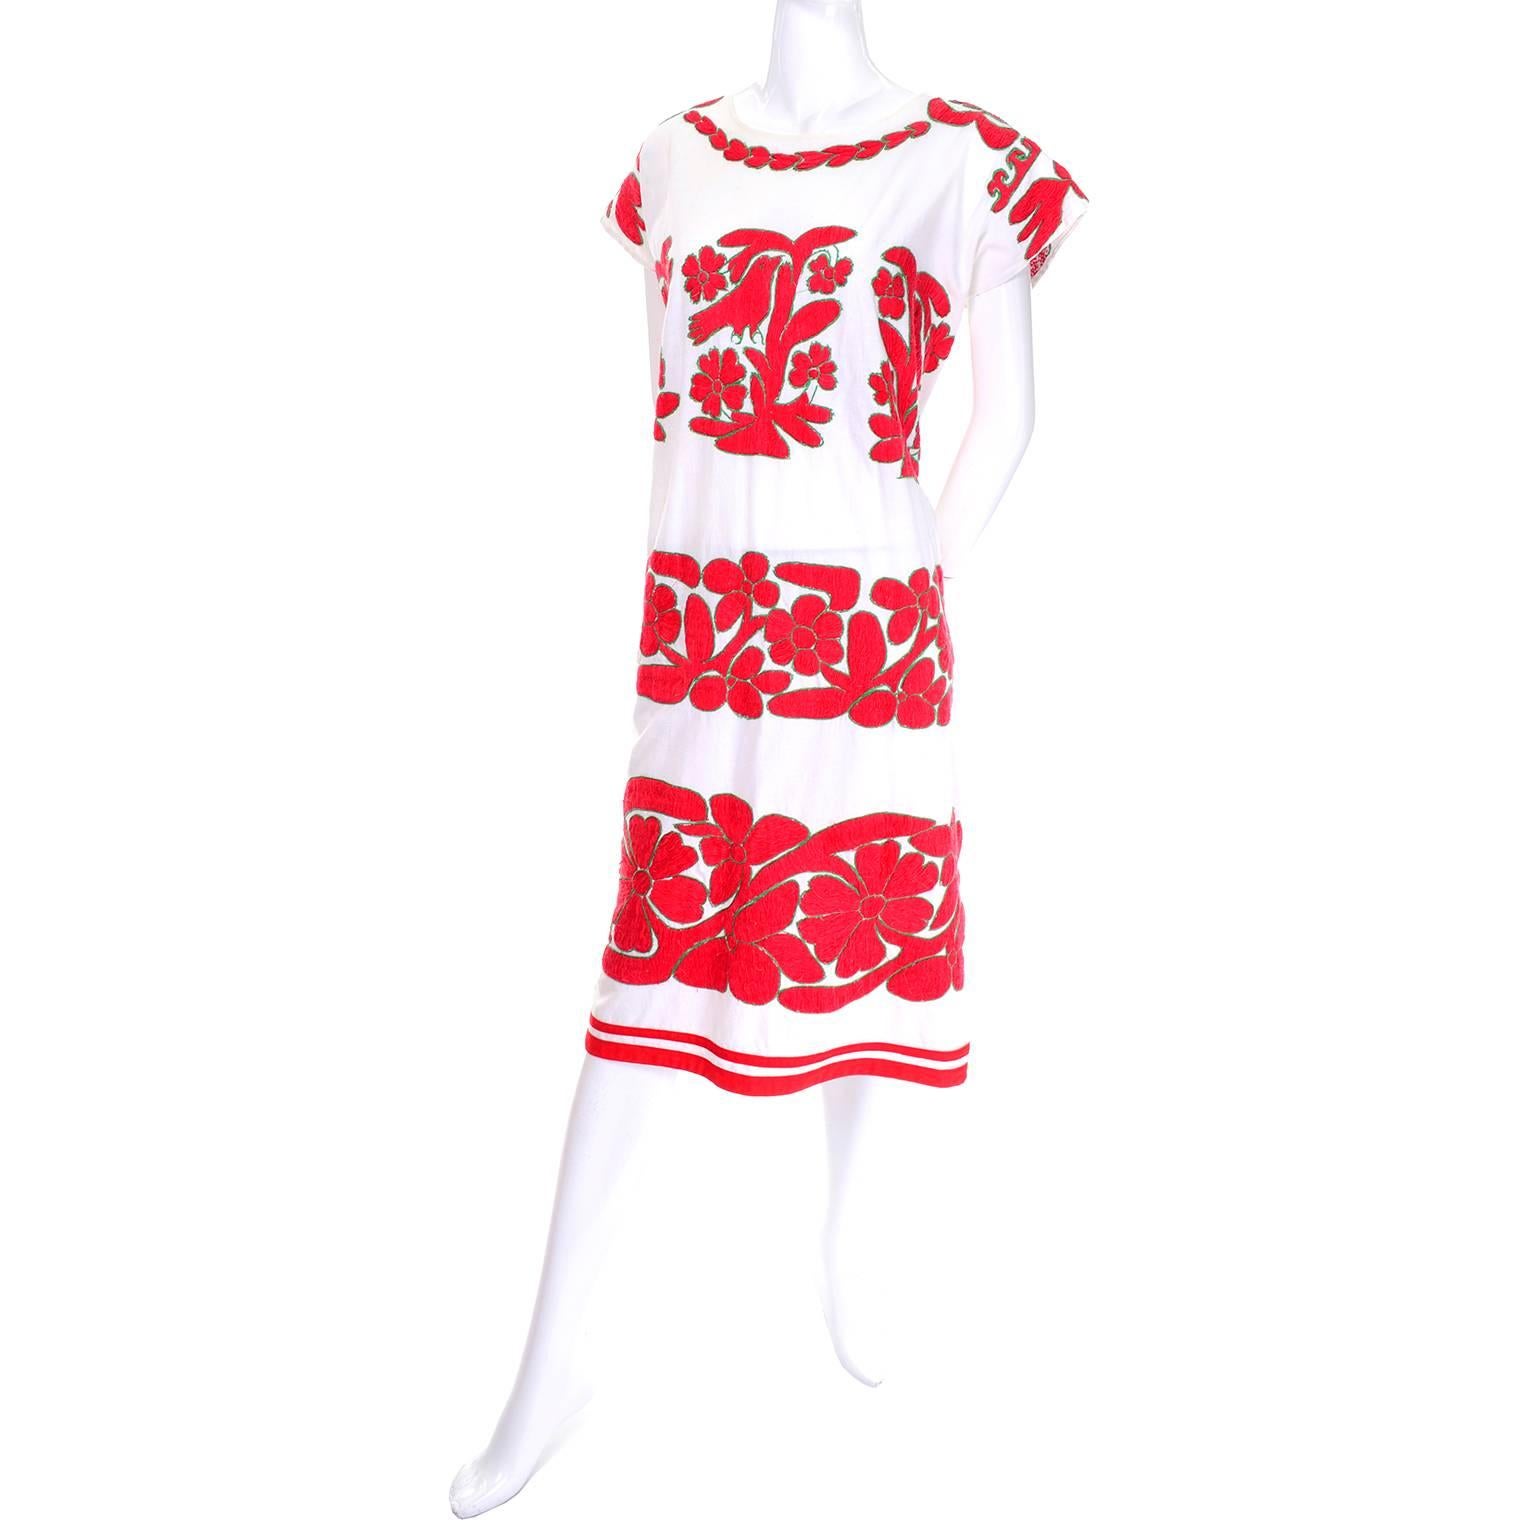 This outstanding vintage dress comes from an estate we acquired that included a collection of exceptional vintage 1960's Guatemalan and Mexican embroidered dresses.  This one has lovely thick red embroidery beautiful depicting birds, trees and